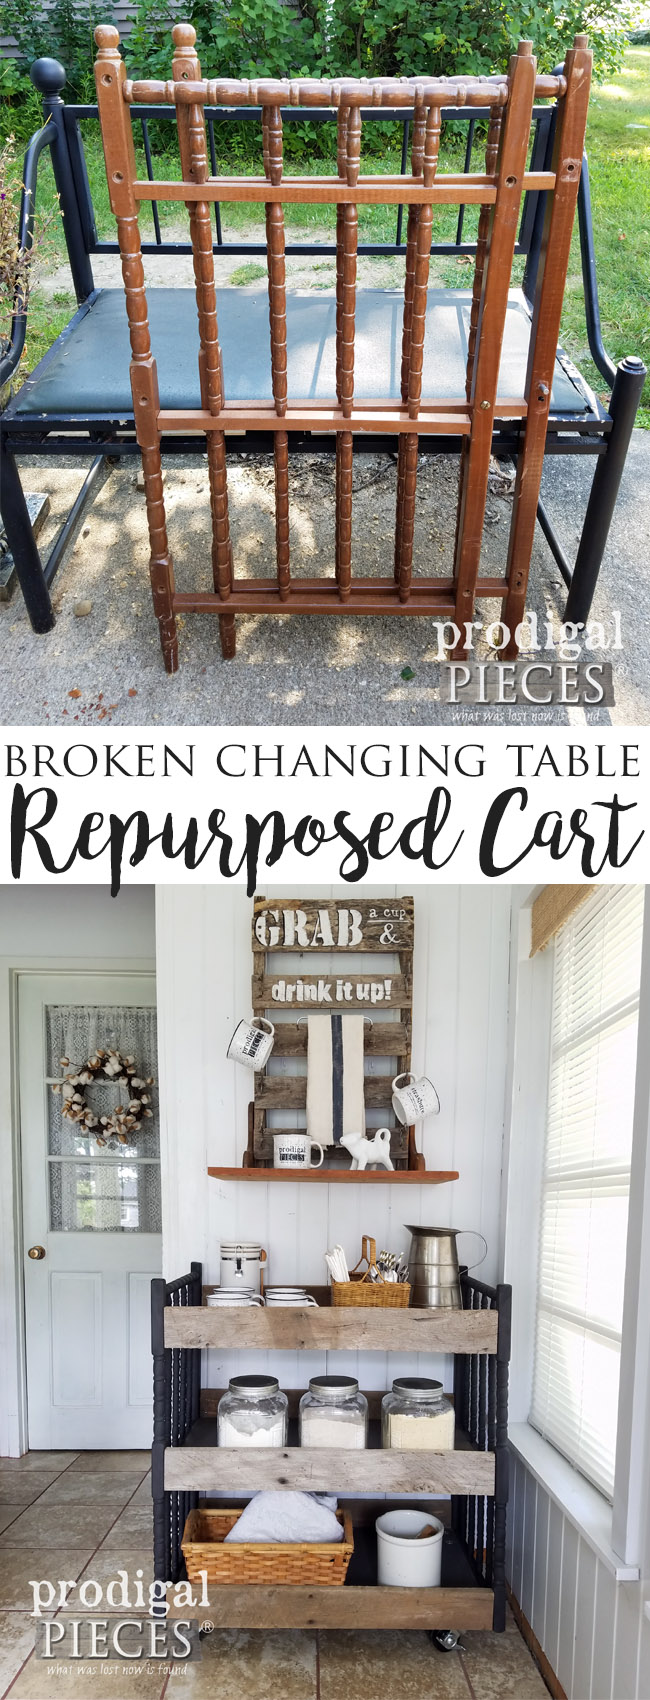 A farmhouse industrial style cart made from reclaimed barn wood and a repurposed baby changing table. See the transformation at Prodigal Pieces | prodigalpieces.com